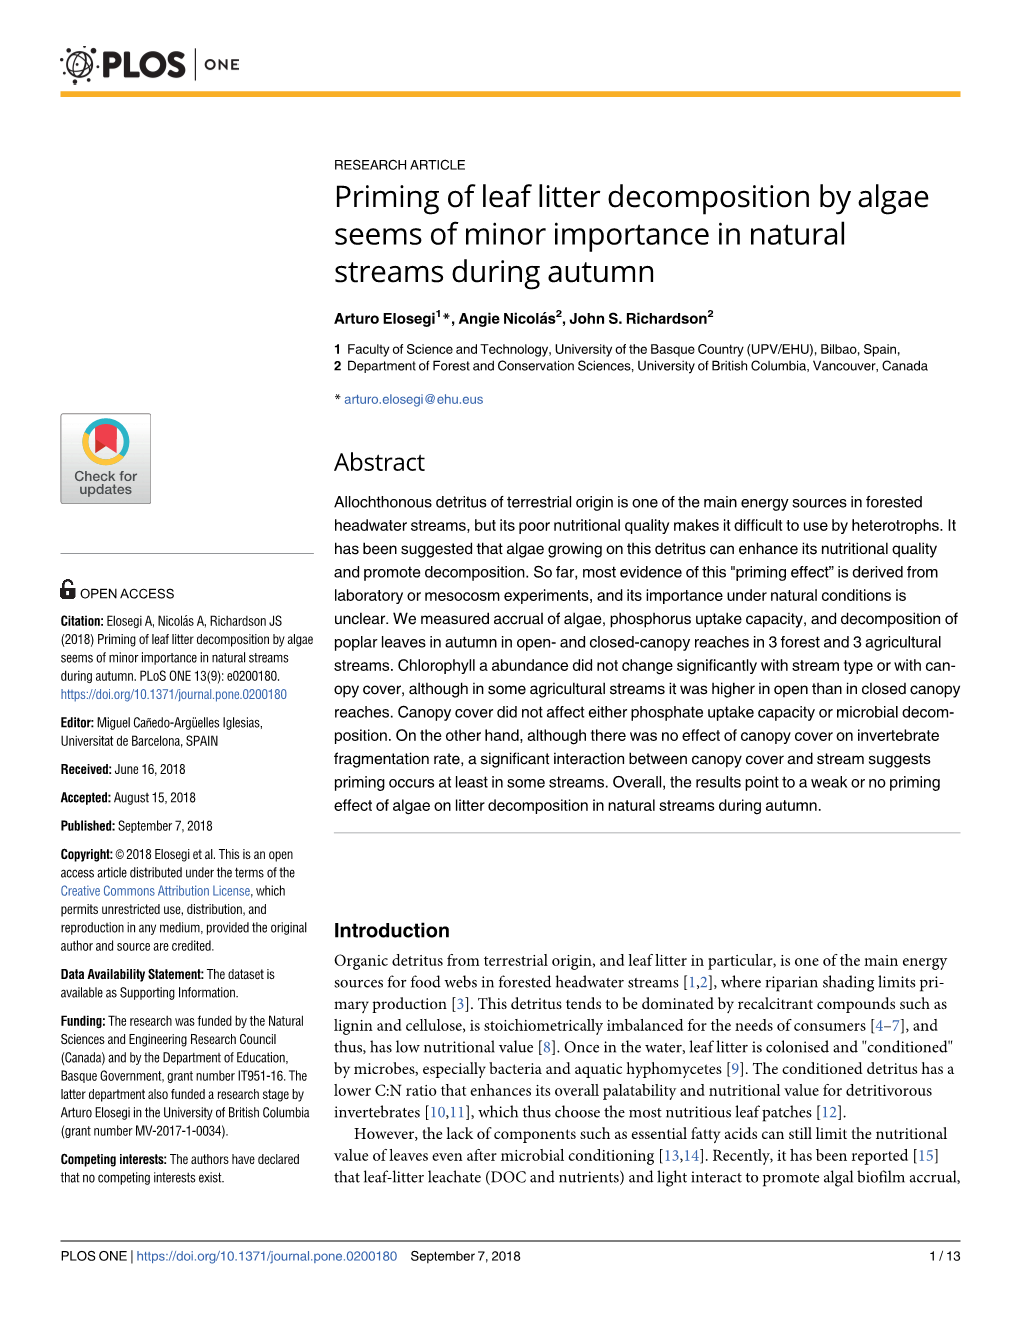 Priming of Leaf Litter Decomposition by Algae Seems of Minor Importance in Natural Streams During Autumn